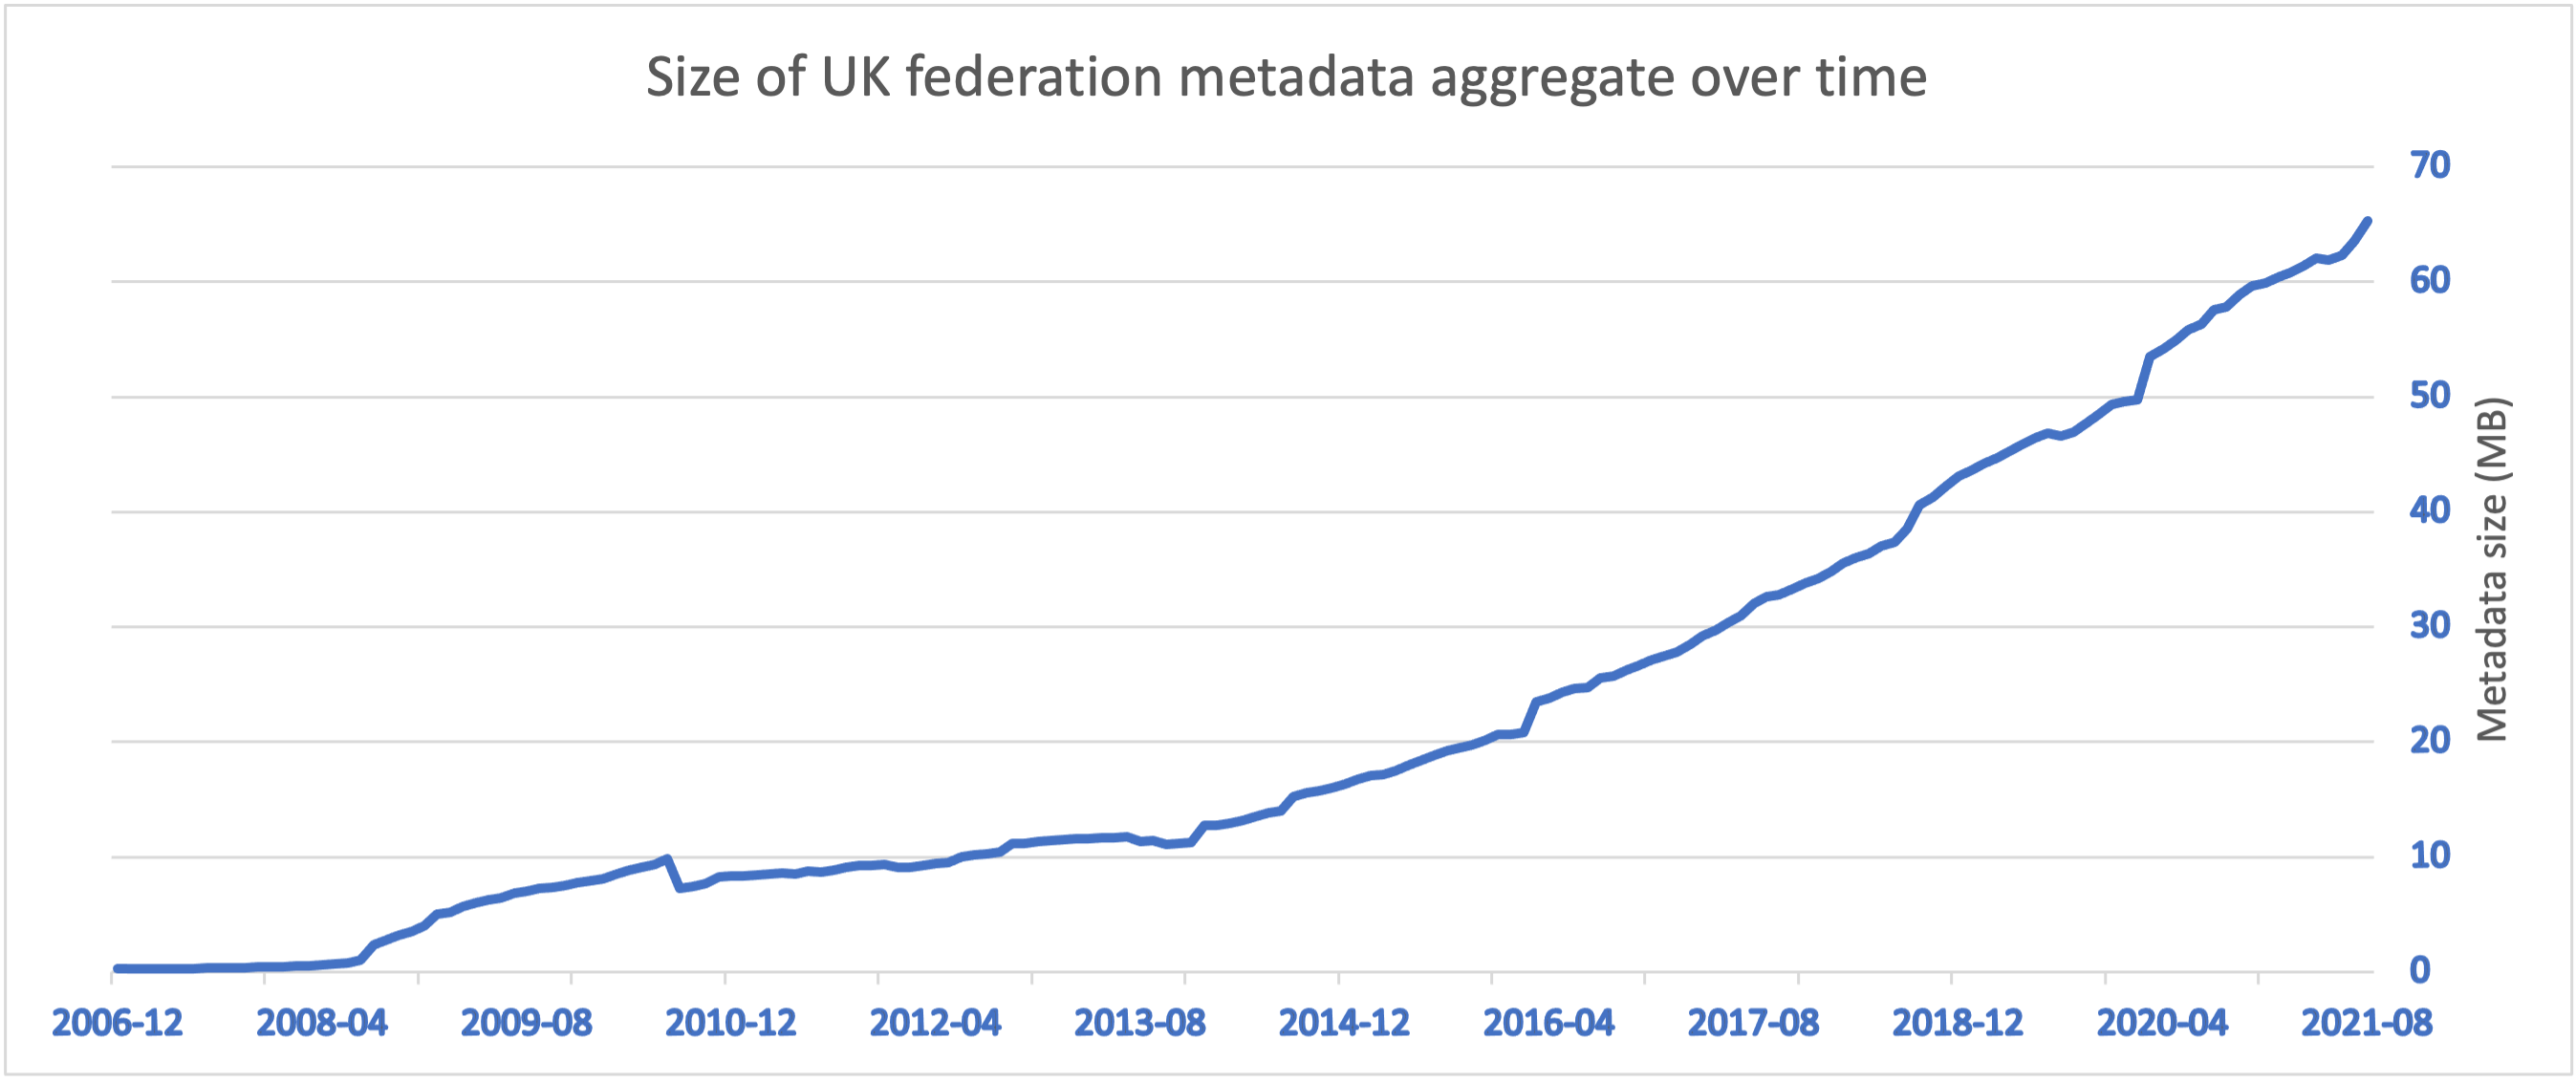 A line graph showing the size of UK federation metadata aggregate over time. It displays an upward trend from 2008 to 2021